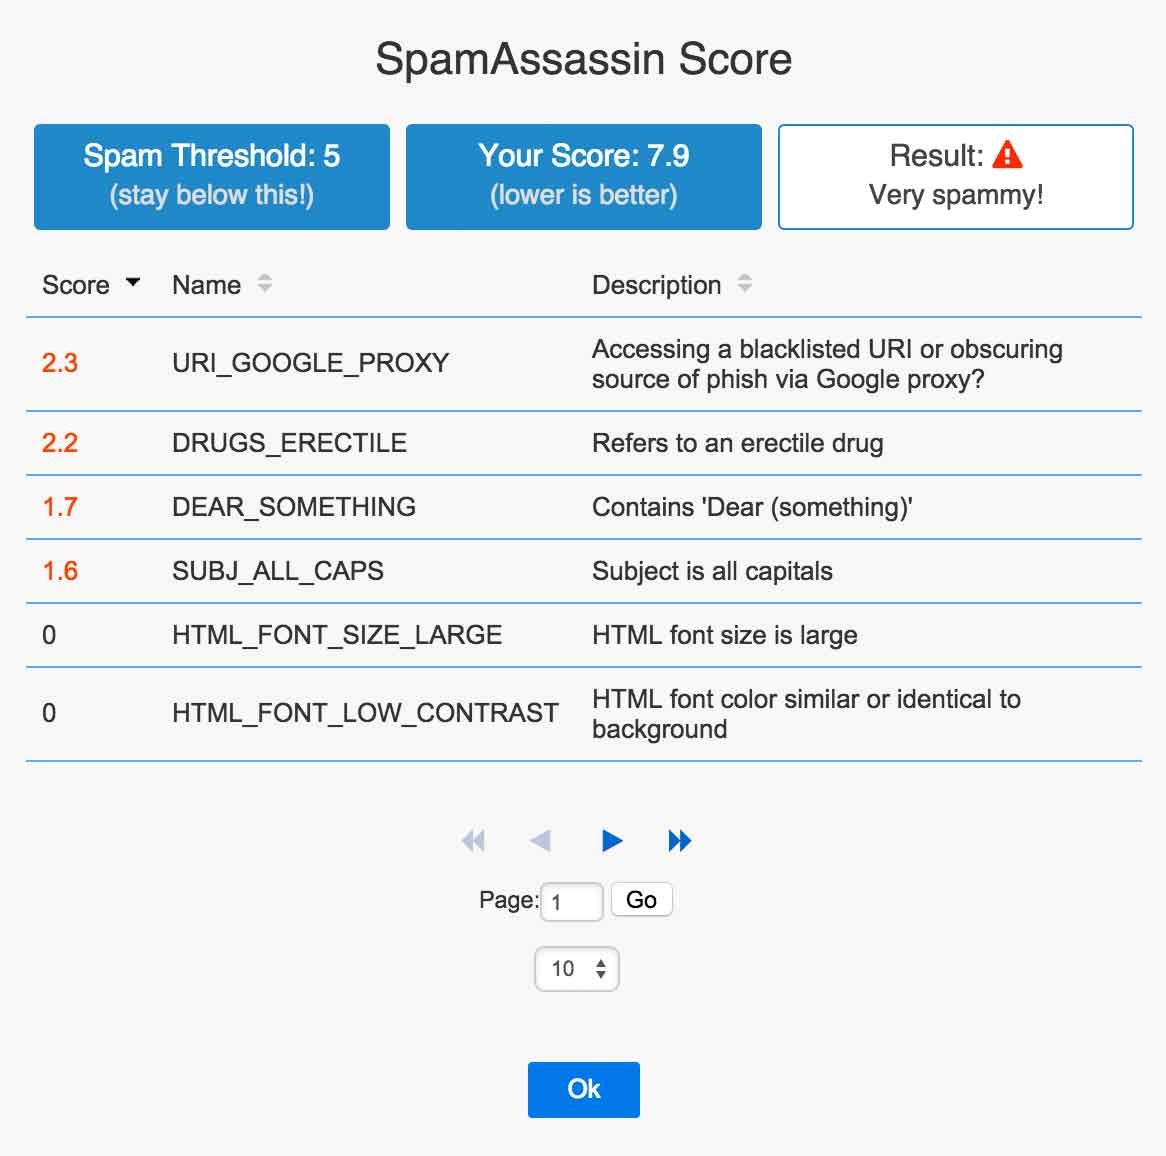 spamassassin see rejected emails